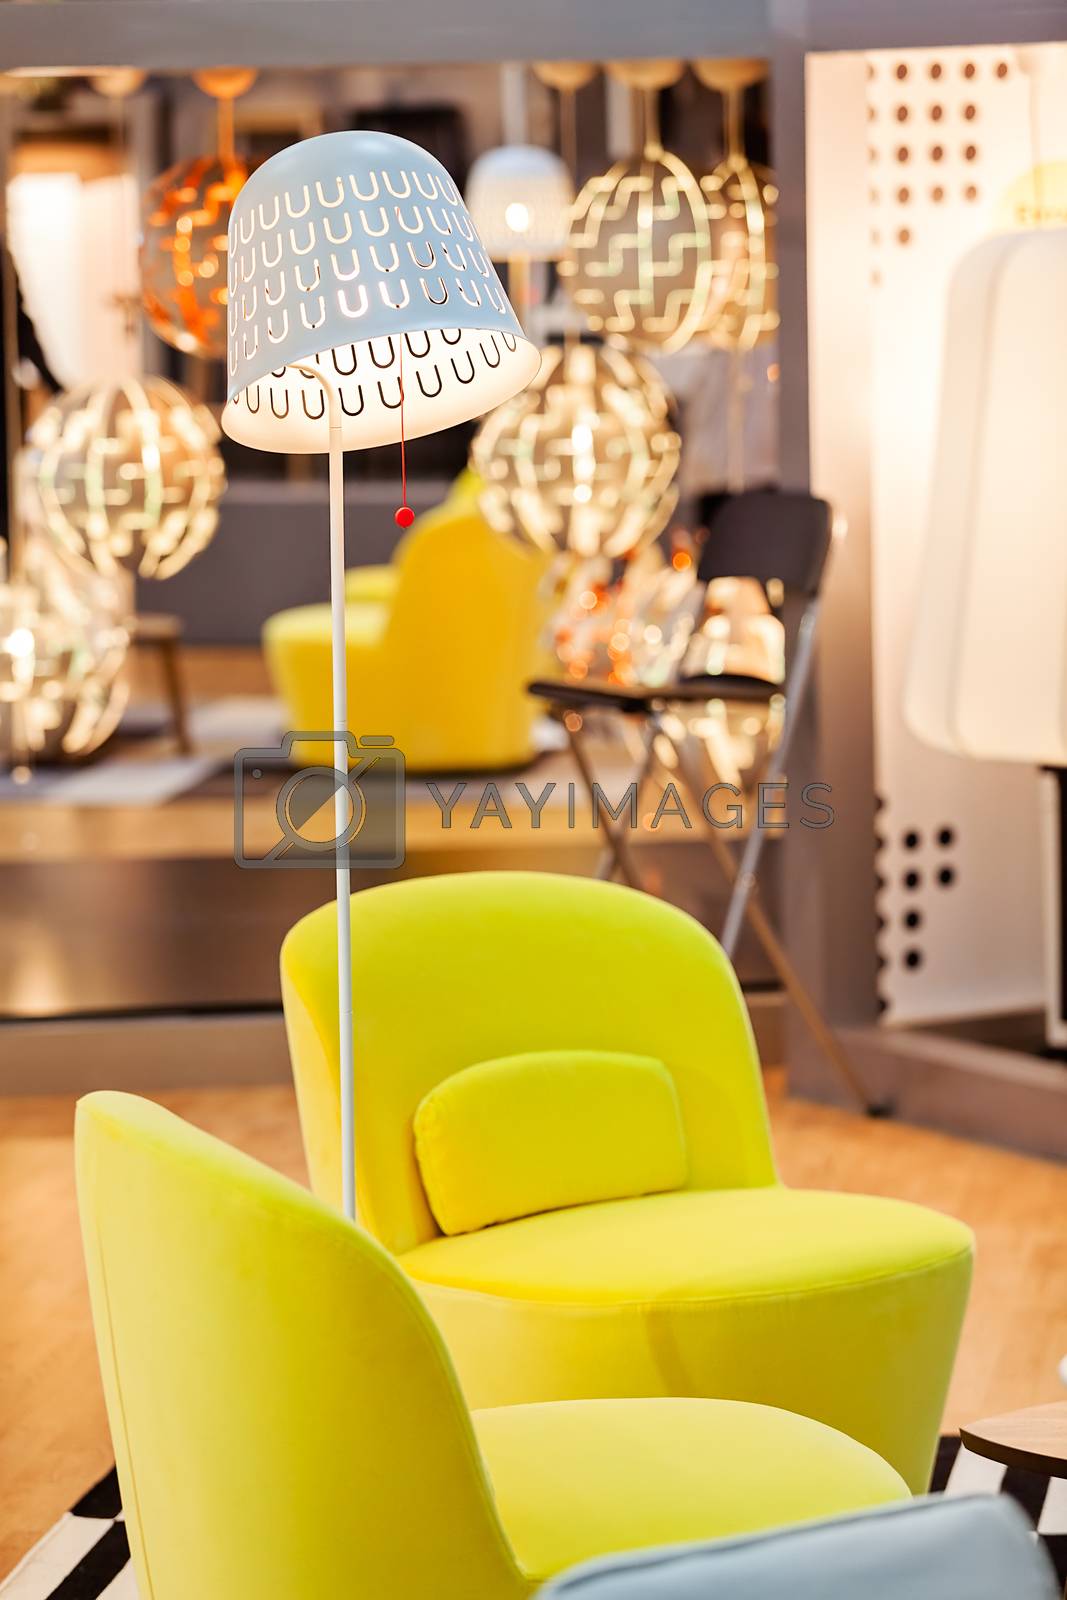 Royalty free image of For example chairs by vladimirnenezic